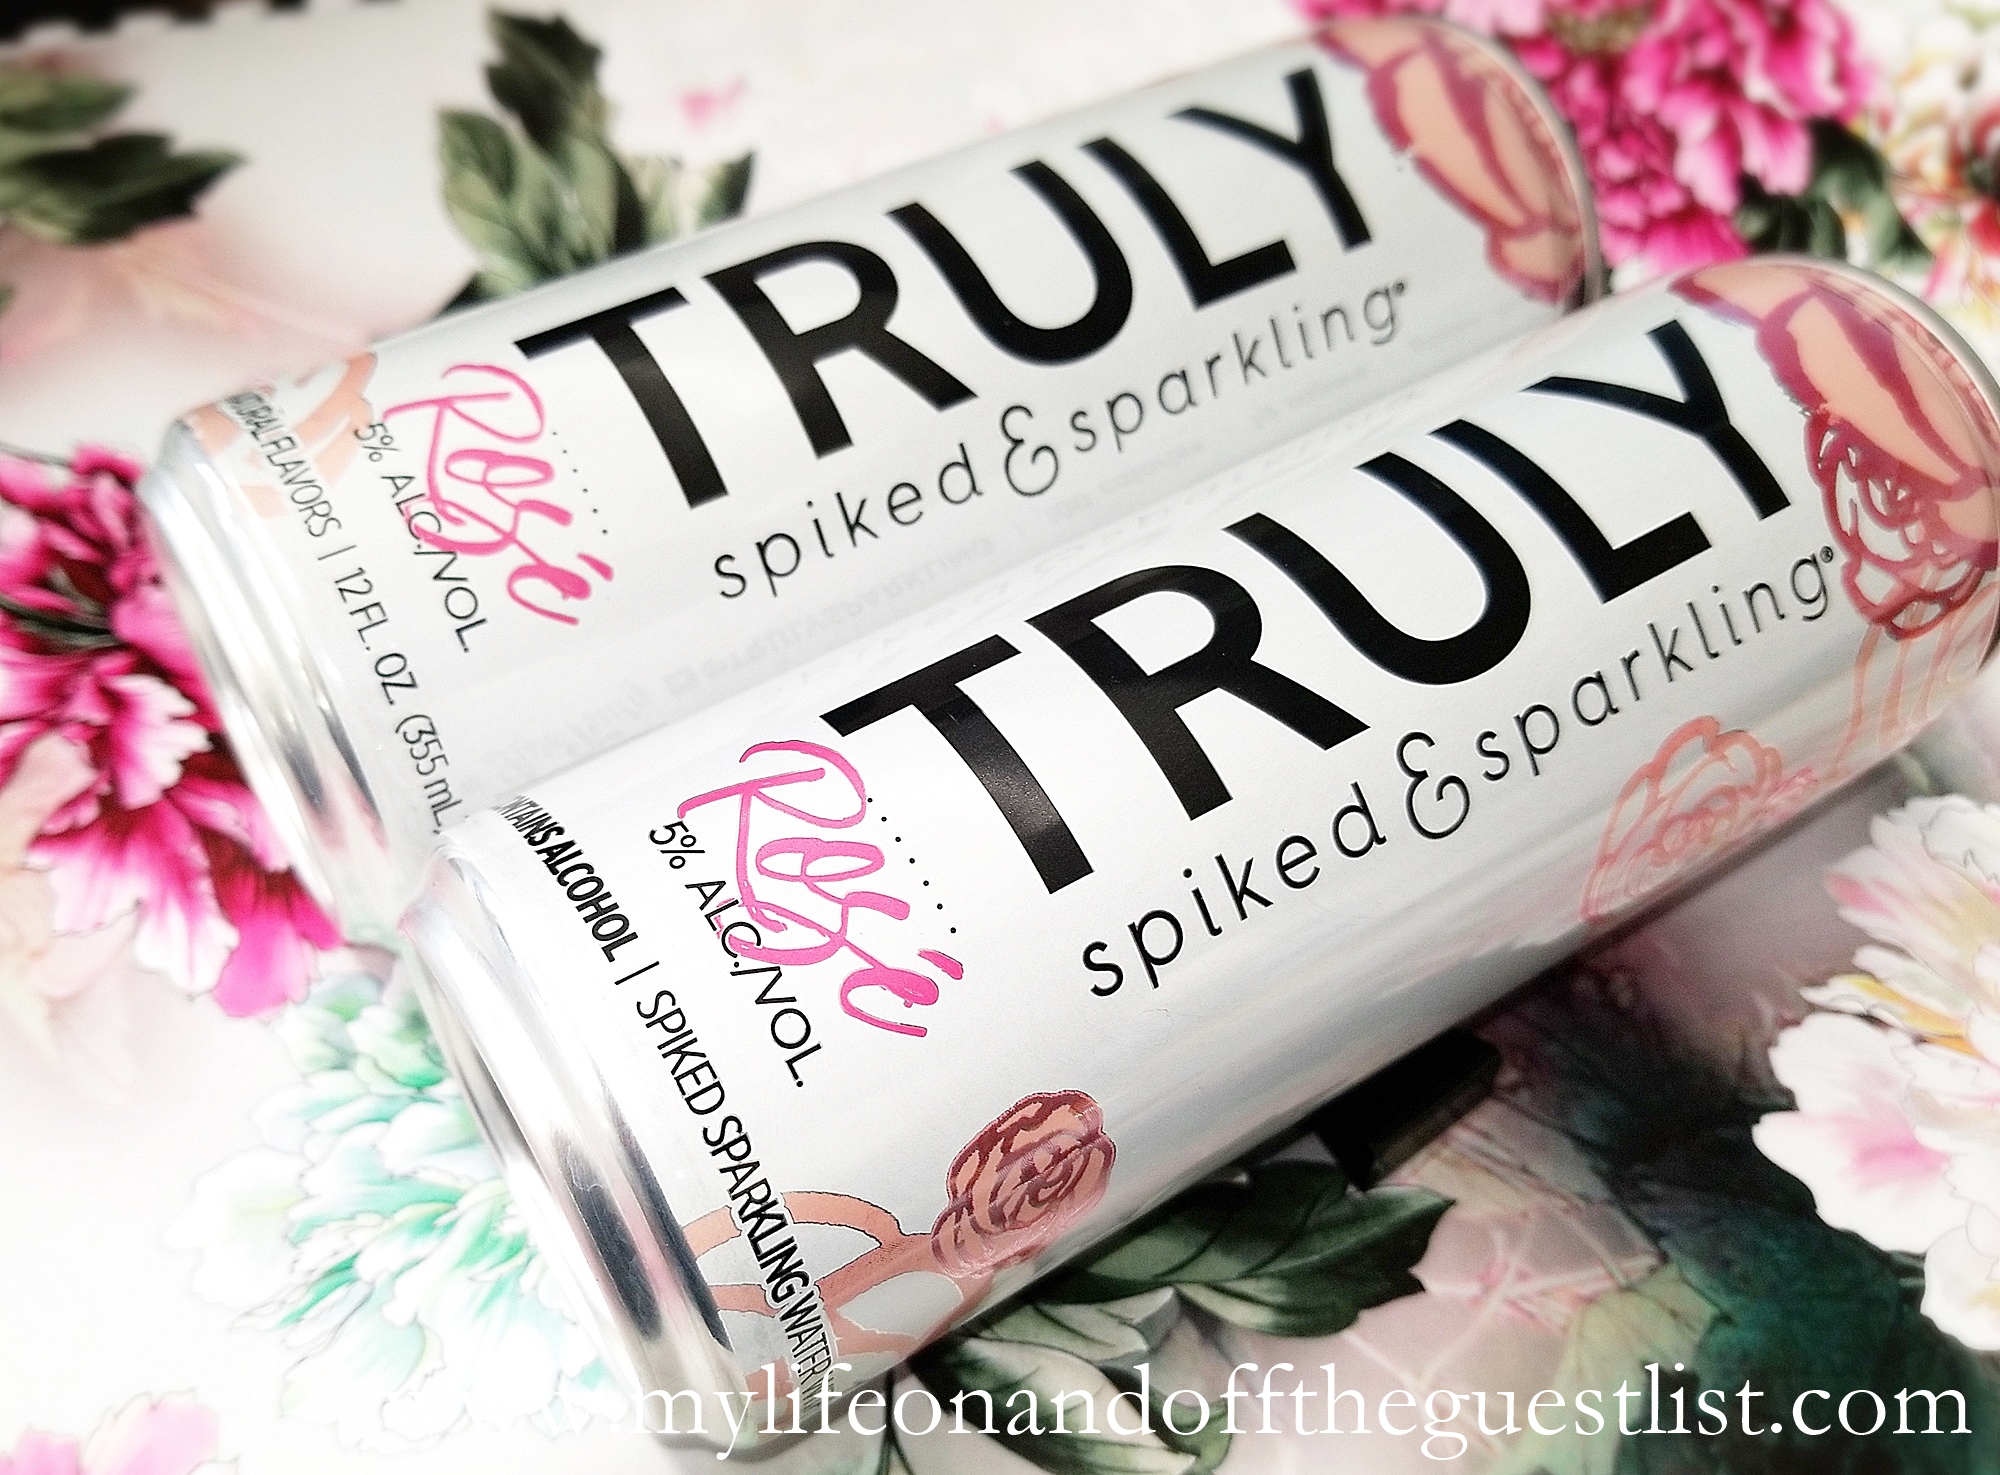 Truly Refreshing Introducing Truly Spiked And Sparkling Rose